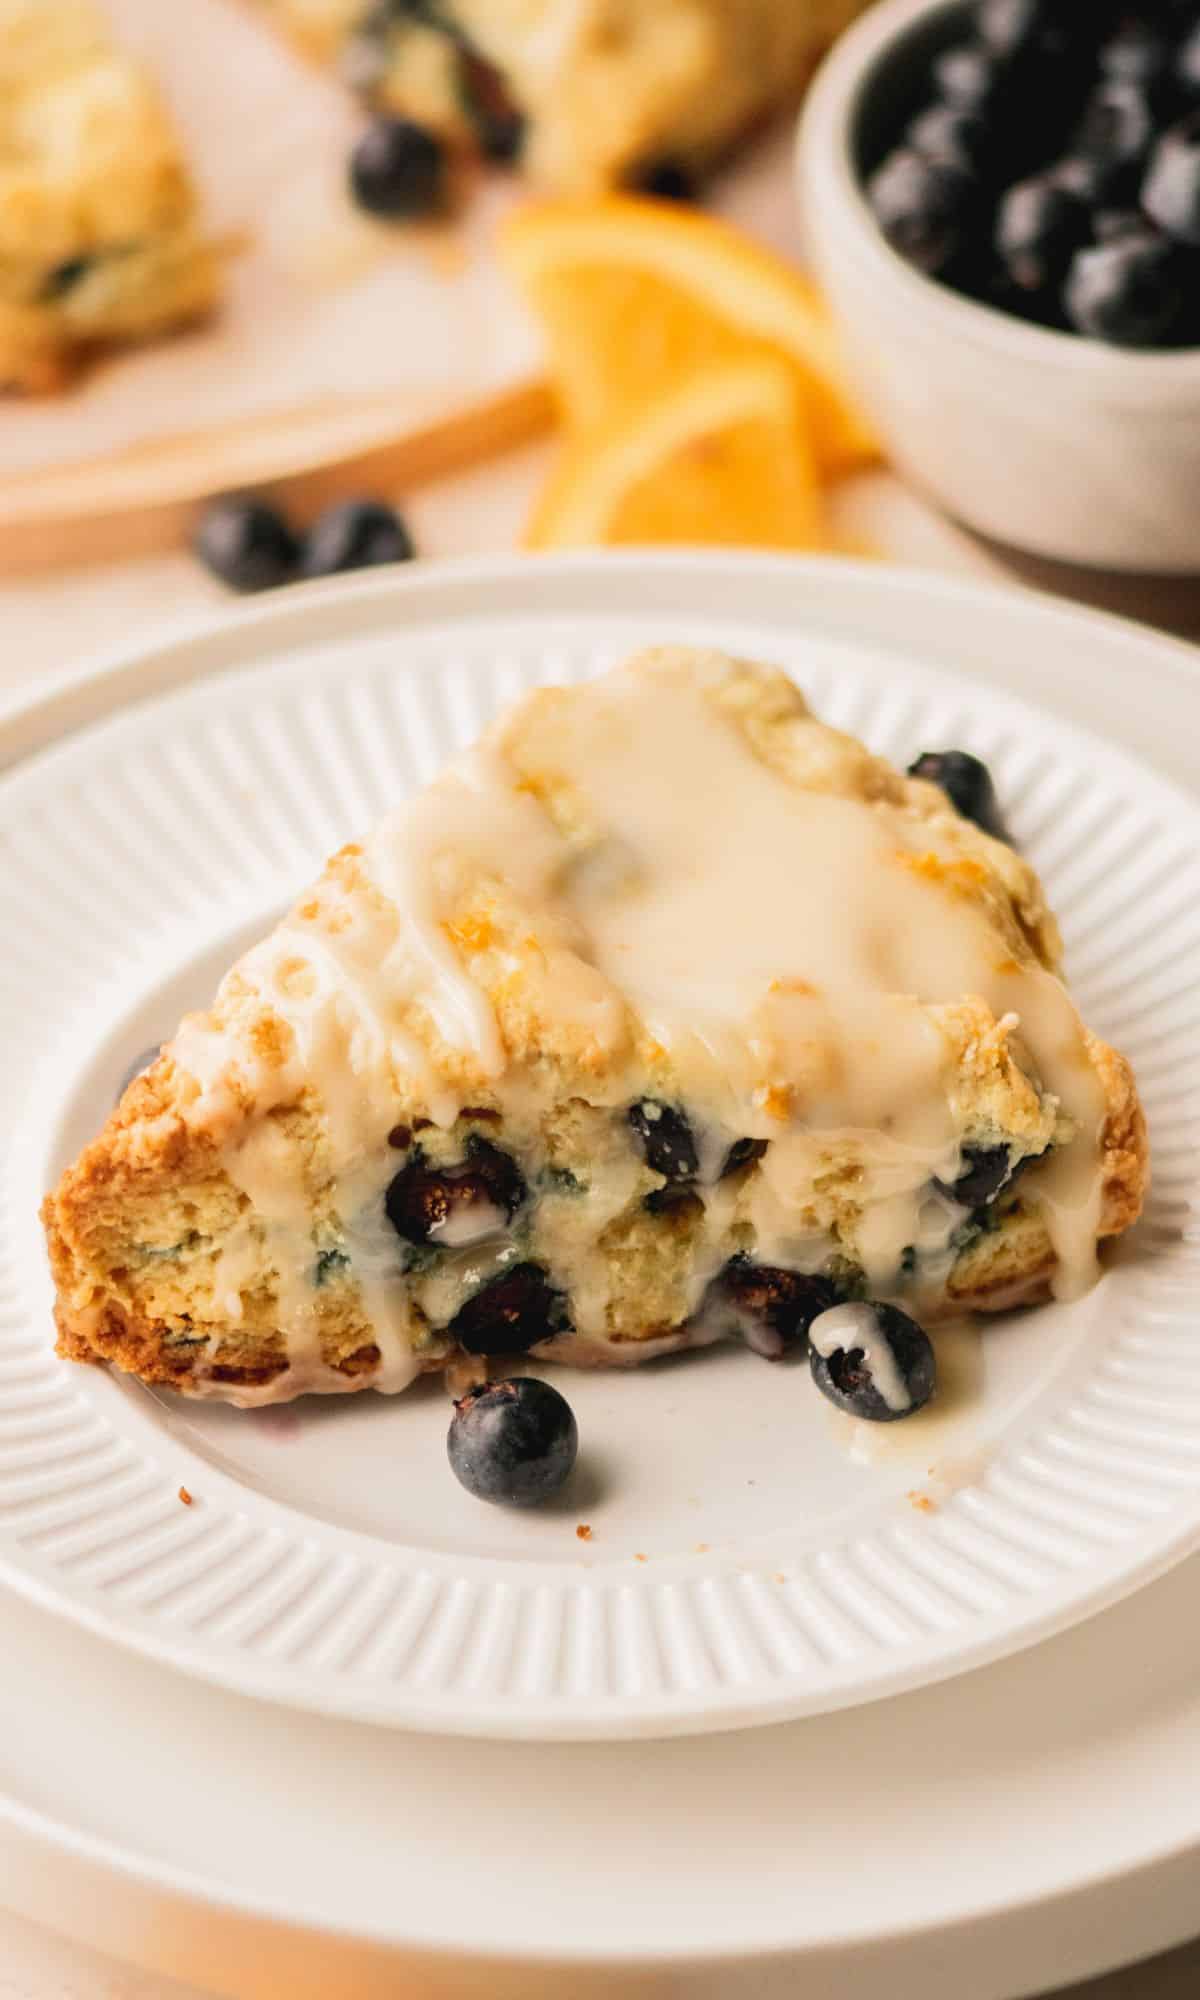 A blueberry scone on a white plate.